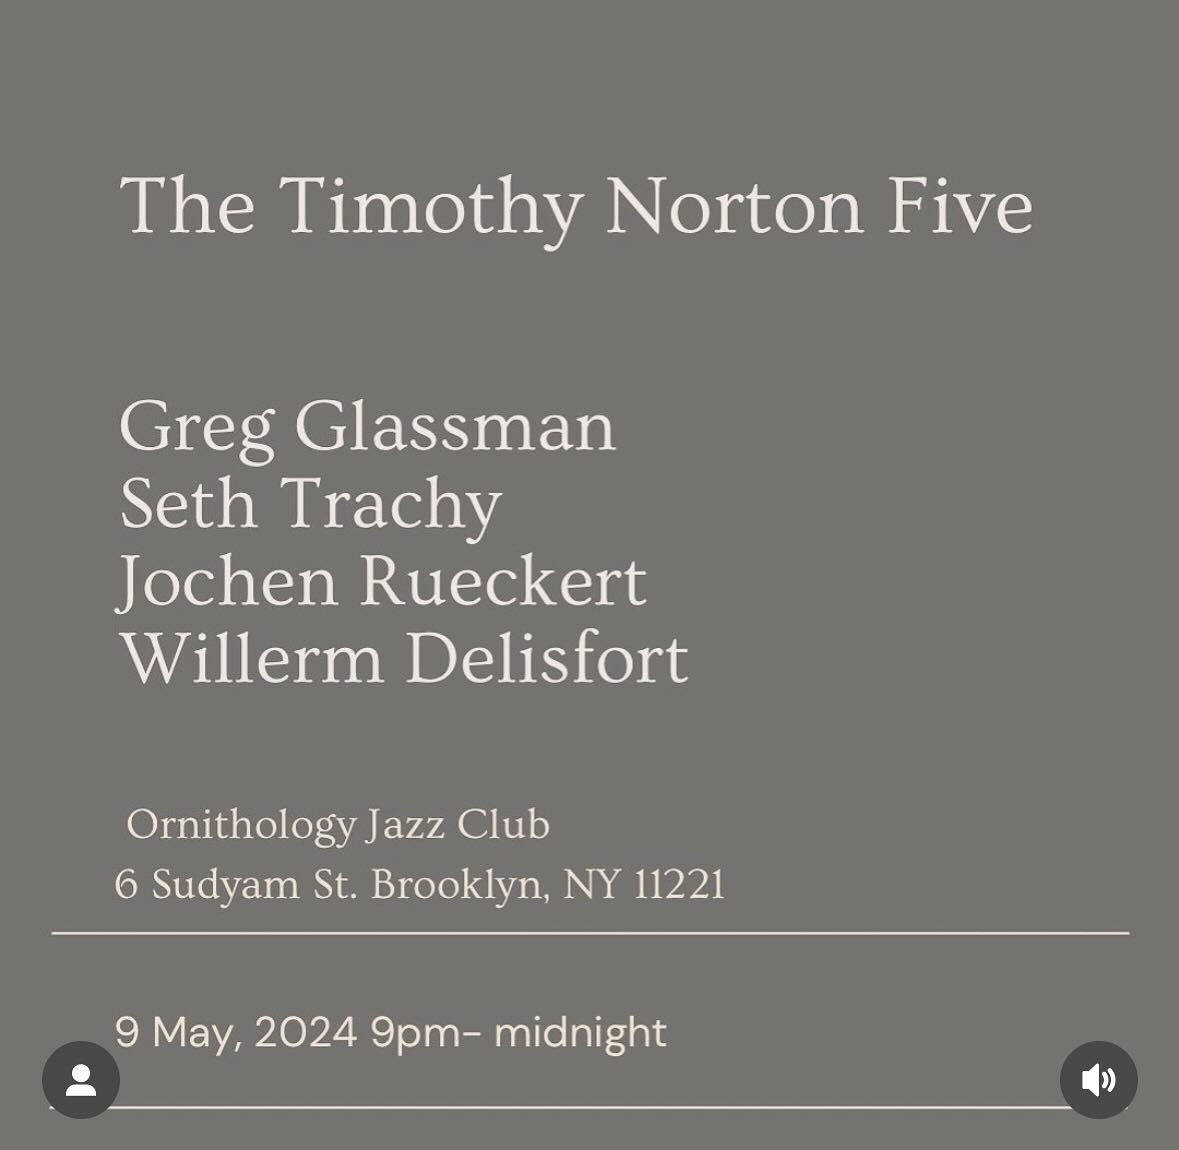 @timothynortonbass May 9th at @ornithologyjazzclub in Brooklyn don&rsquo;t miss it! #TRRcollective